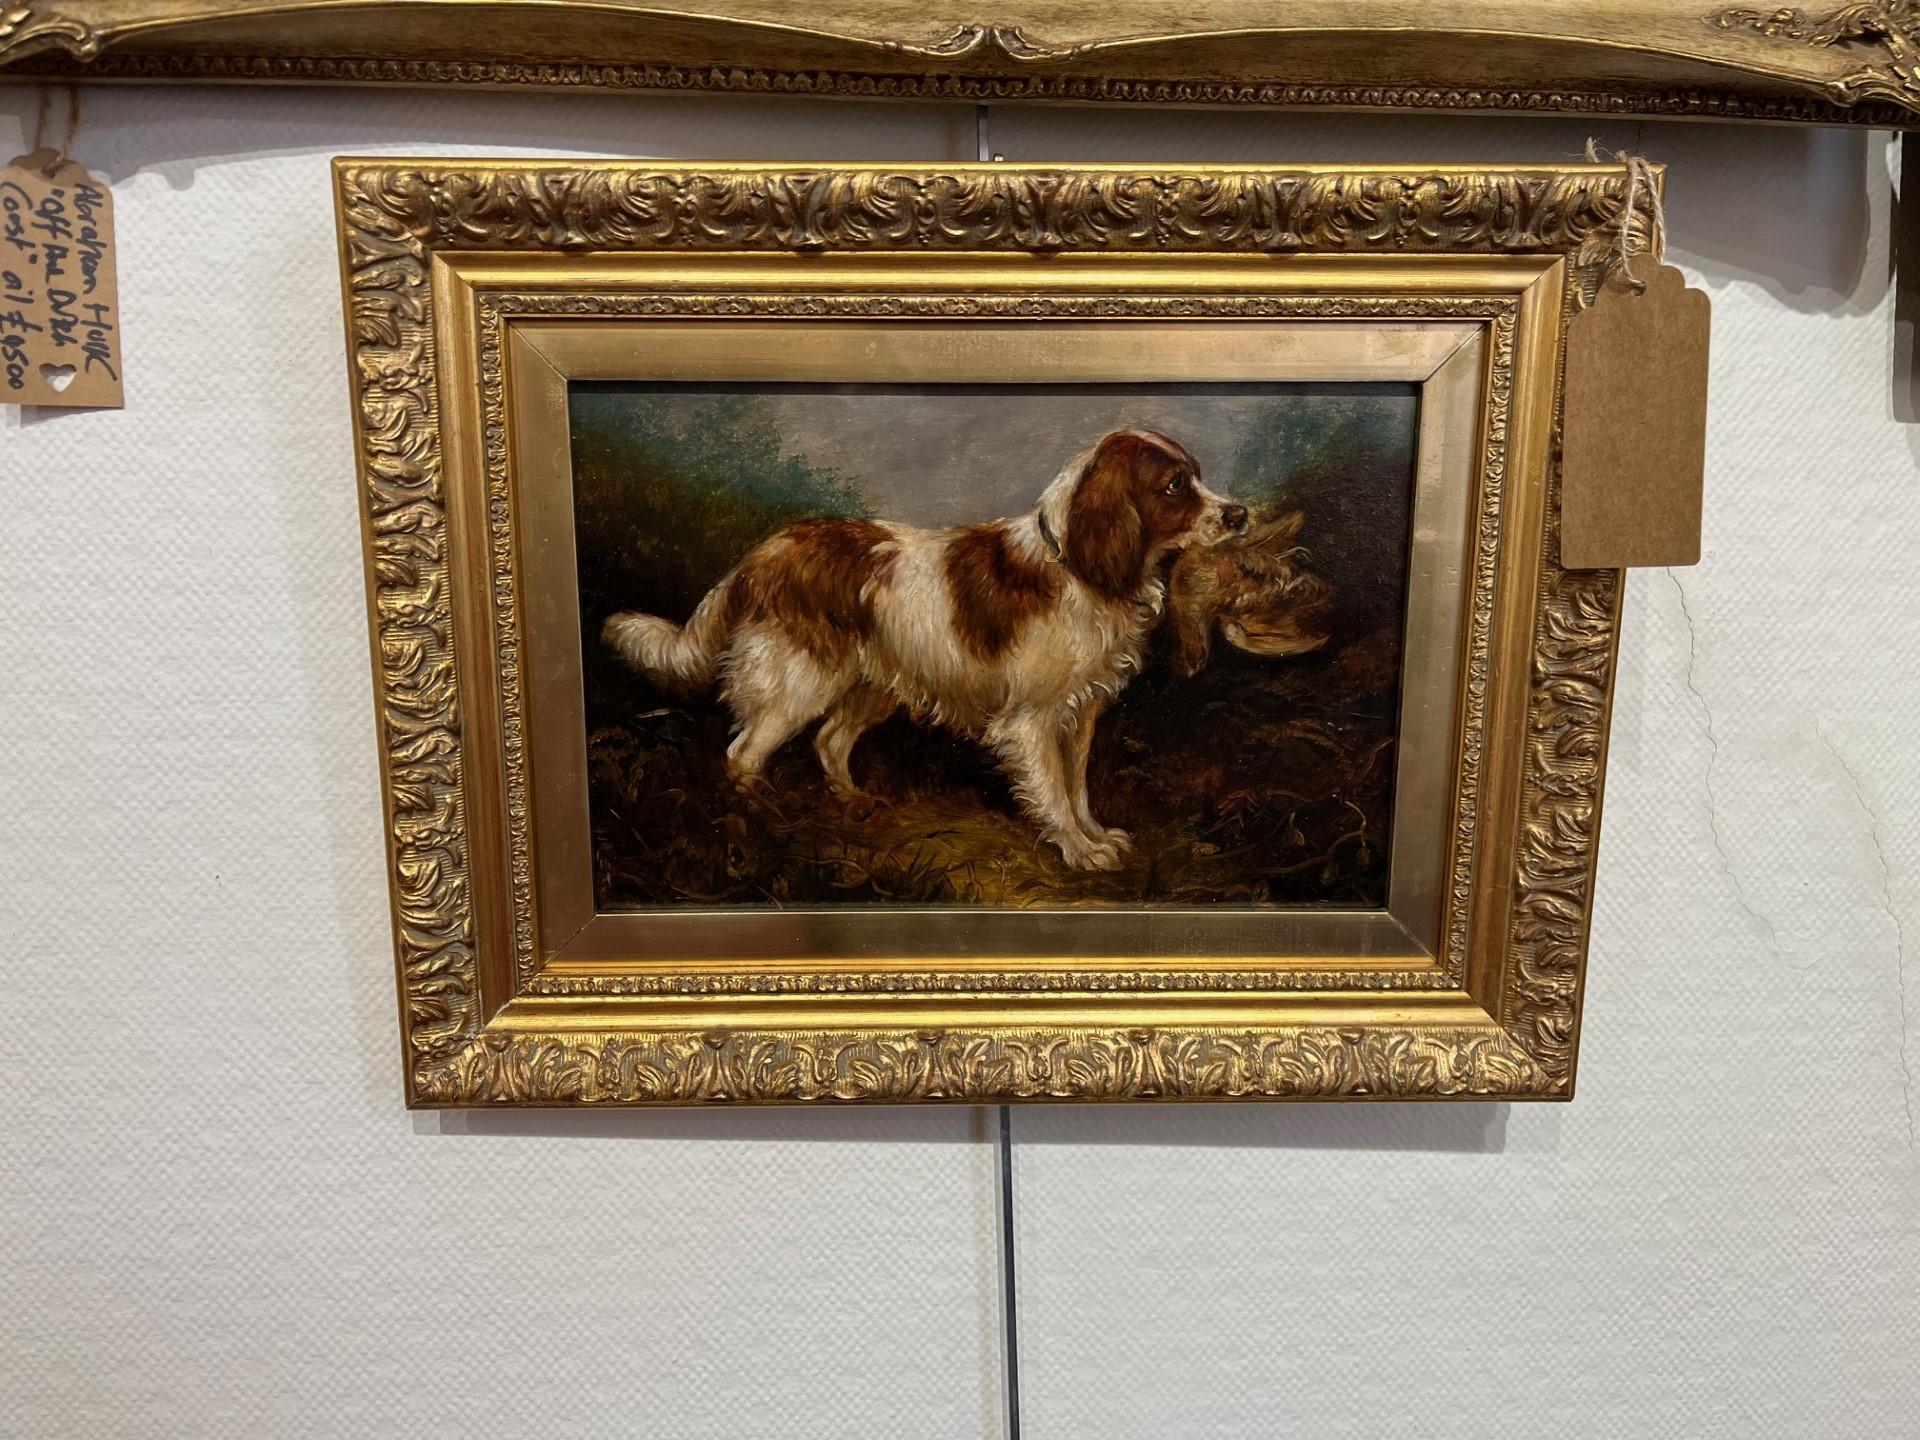 Hunting Dog retrieving Grouse after the shoot, Landscape Oil  in Gilt Frame - Realist Art by Edward Armfield